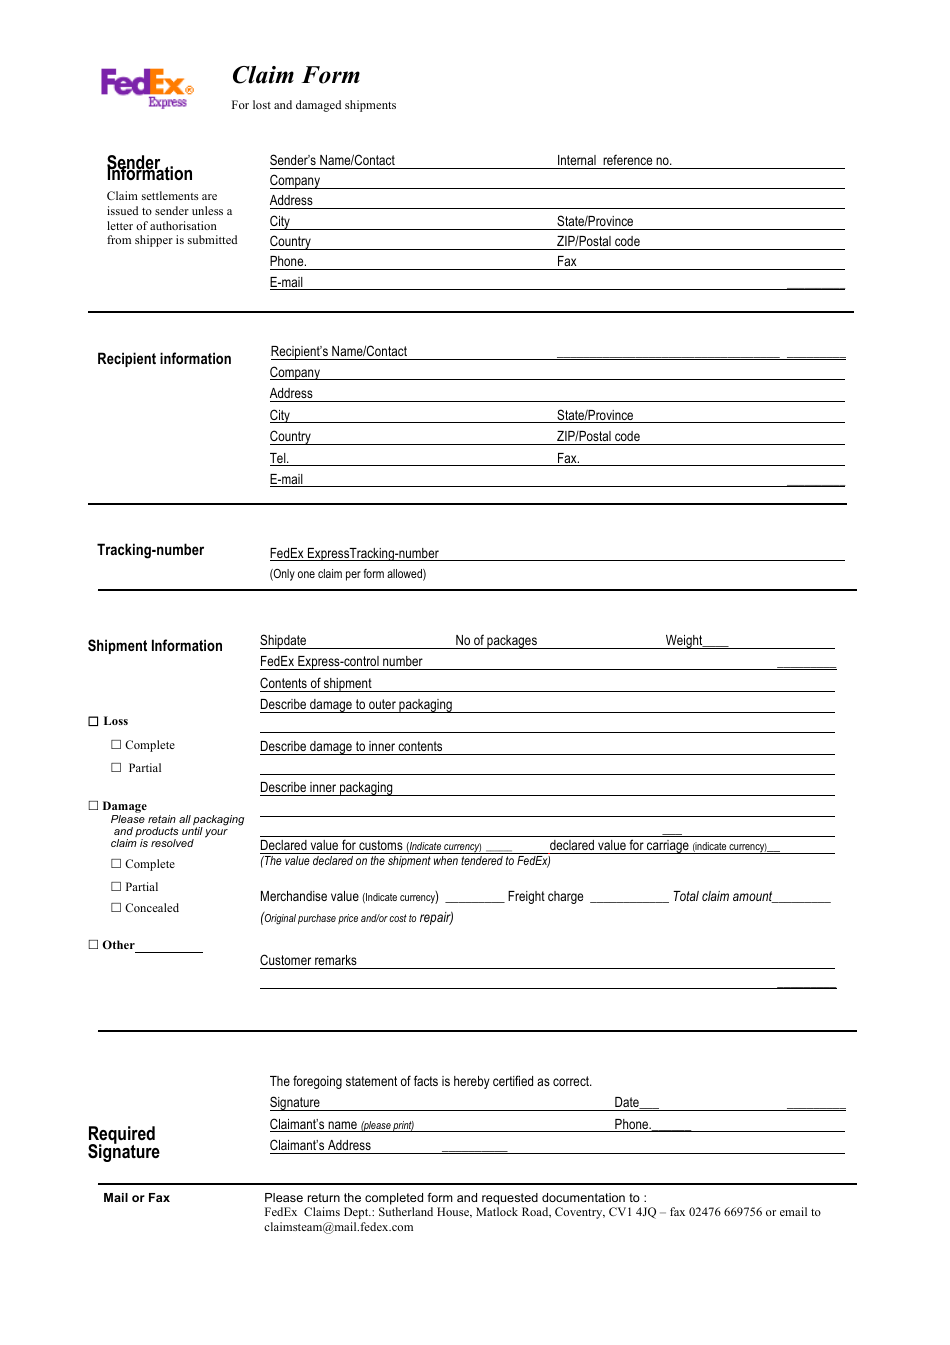 Claim Form for Lost or Damaged Shipments, Page 1